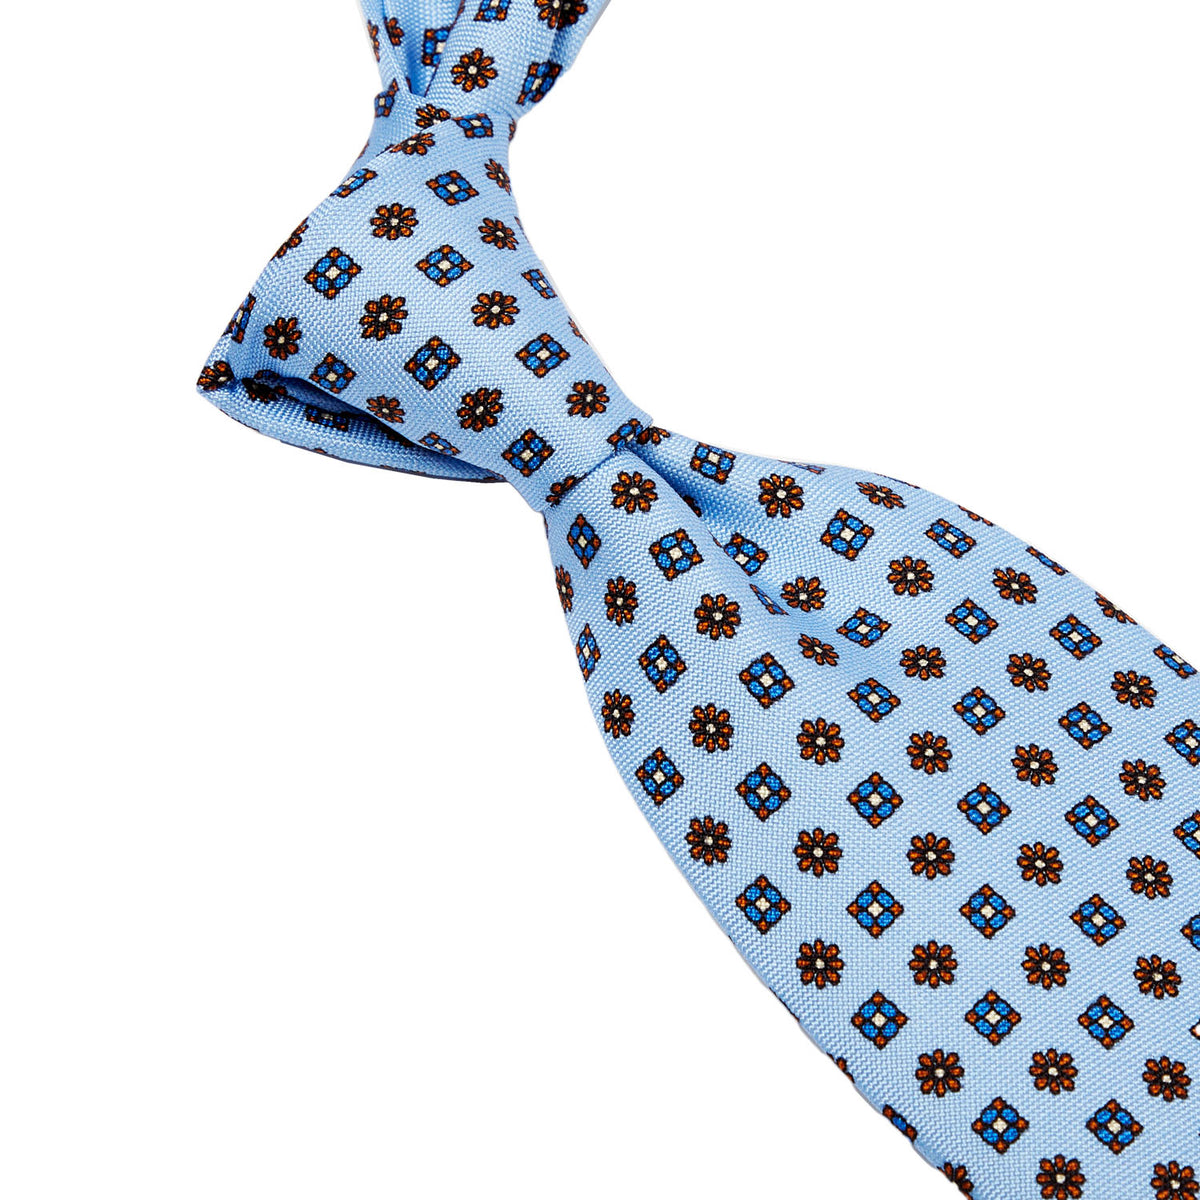 A Sovereign Grade Baby Blue Floral 25oz Silk Hopsack Tie (150x8.5 cm) from KirbyAllison.com with intricate brown and blue designs.